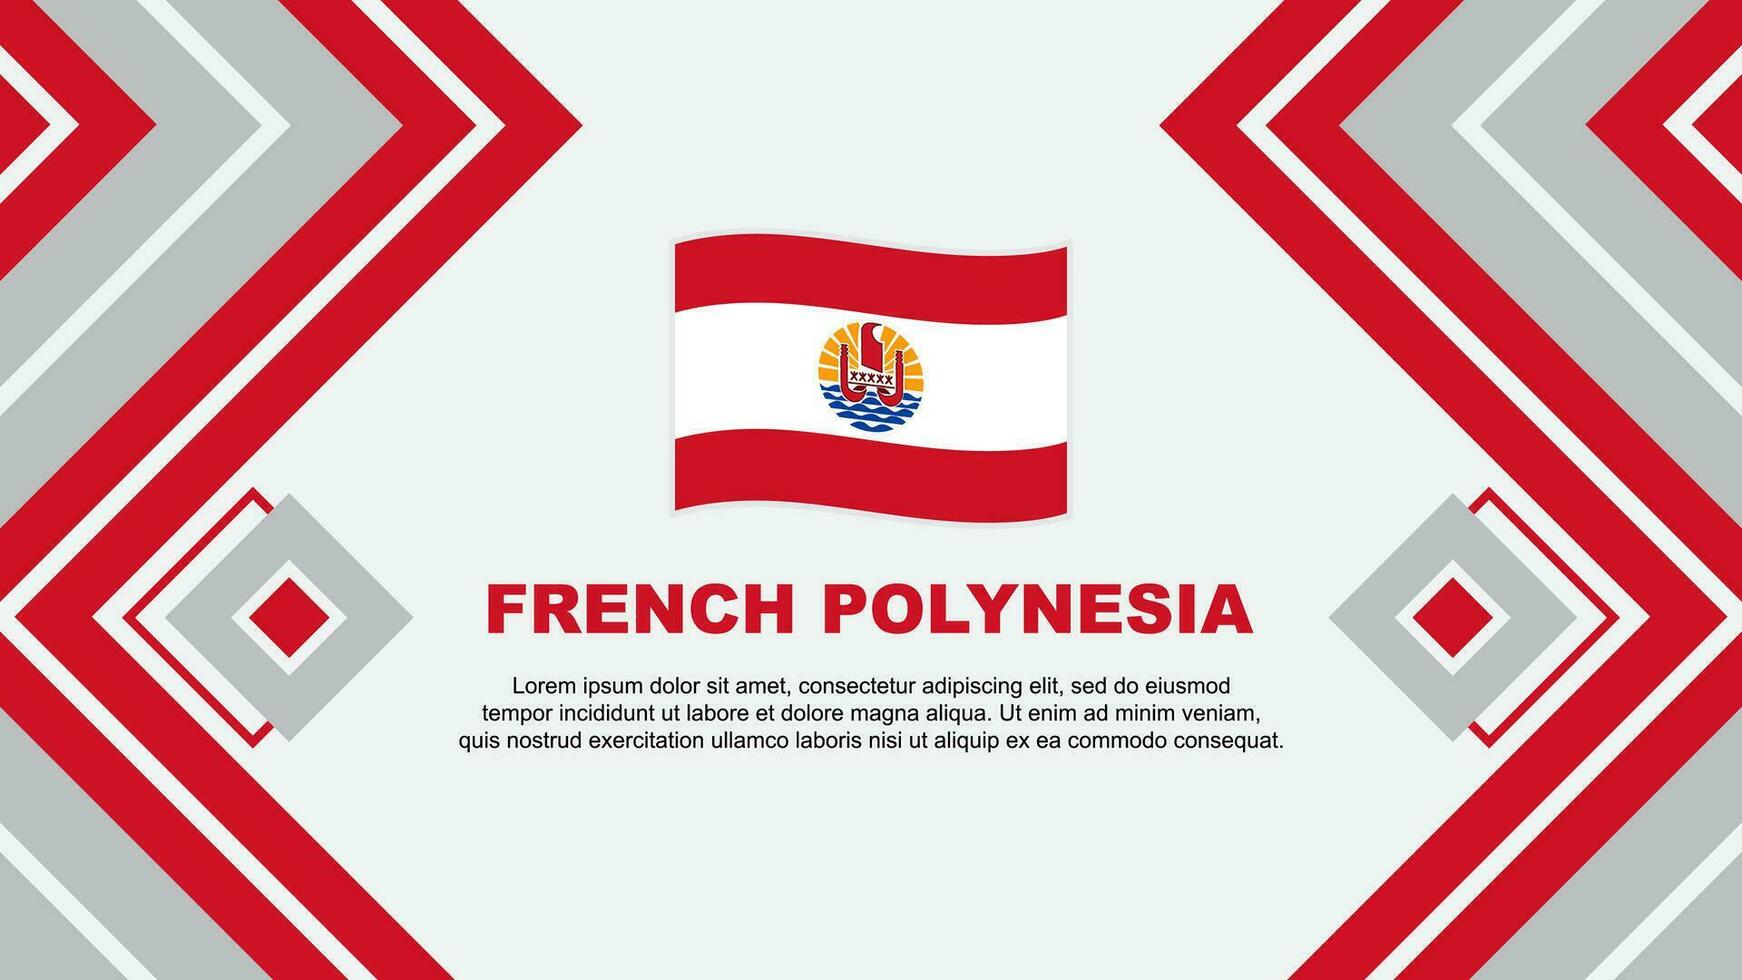 French Polynesia Flag Abstract Background Design Template. French Polynesia Independence Day Banner Wallpaper Vector Illustration. French Polynesia Design